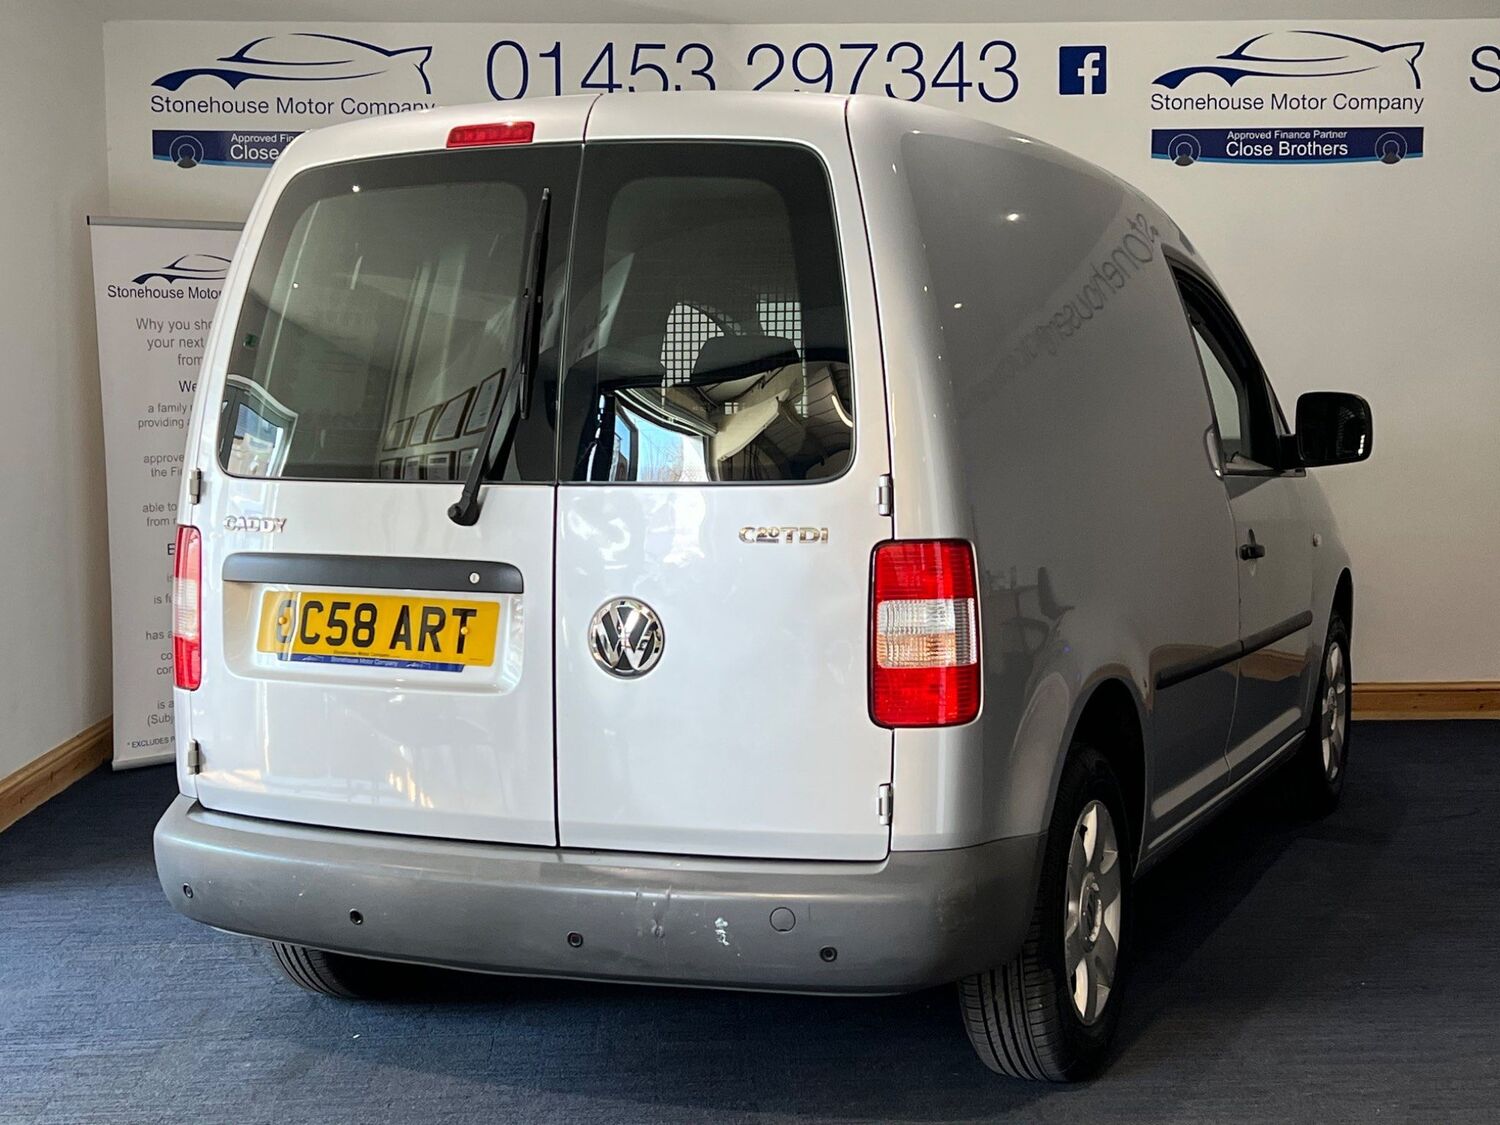 Used VOLKSWAGEN CADDY in Stonehouse, Gloucestershire